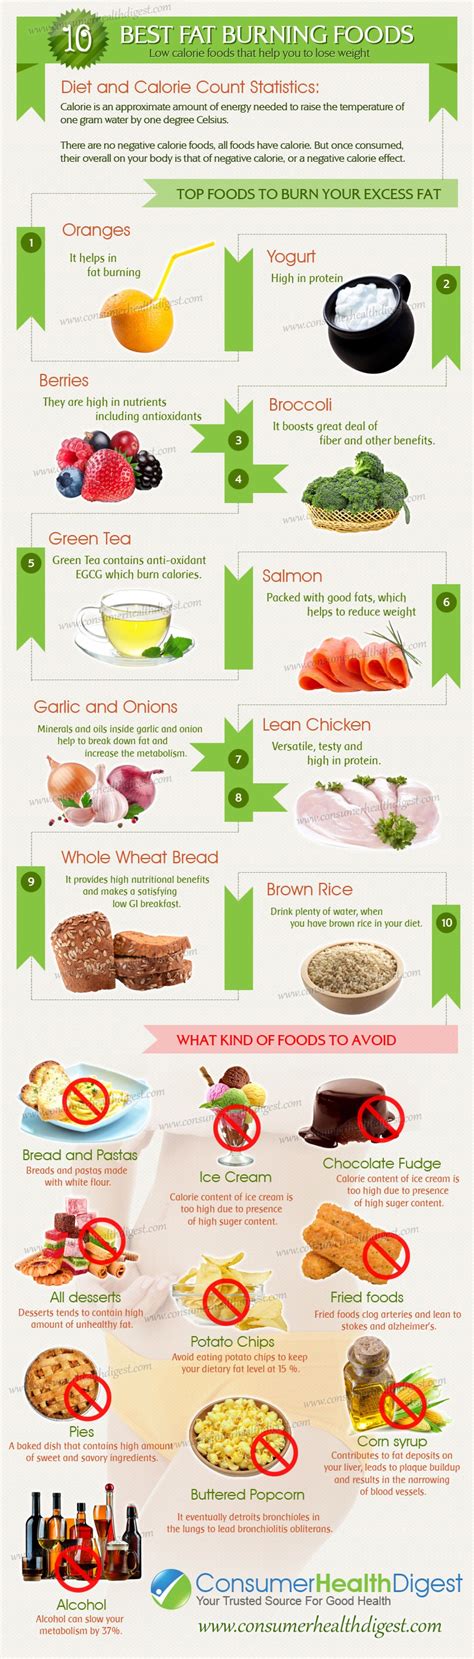 10 Best Fat Burning Foods Pictures Photos And Images For Facebook